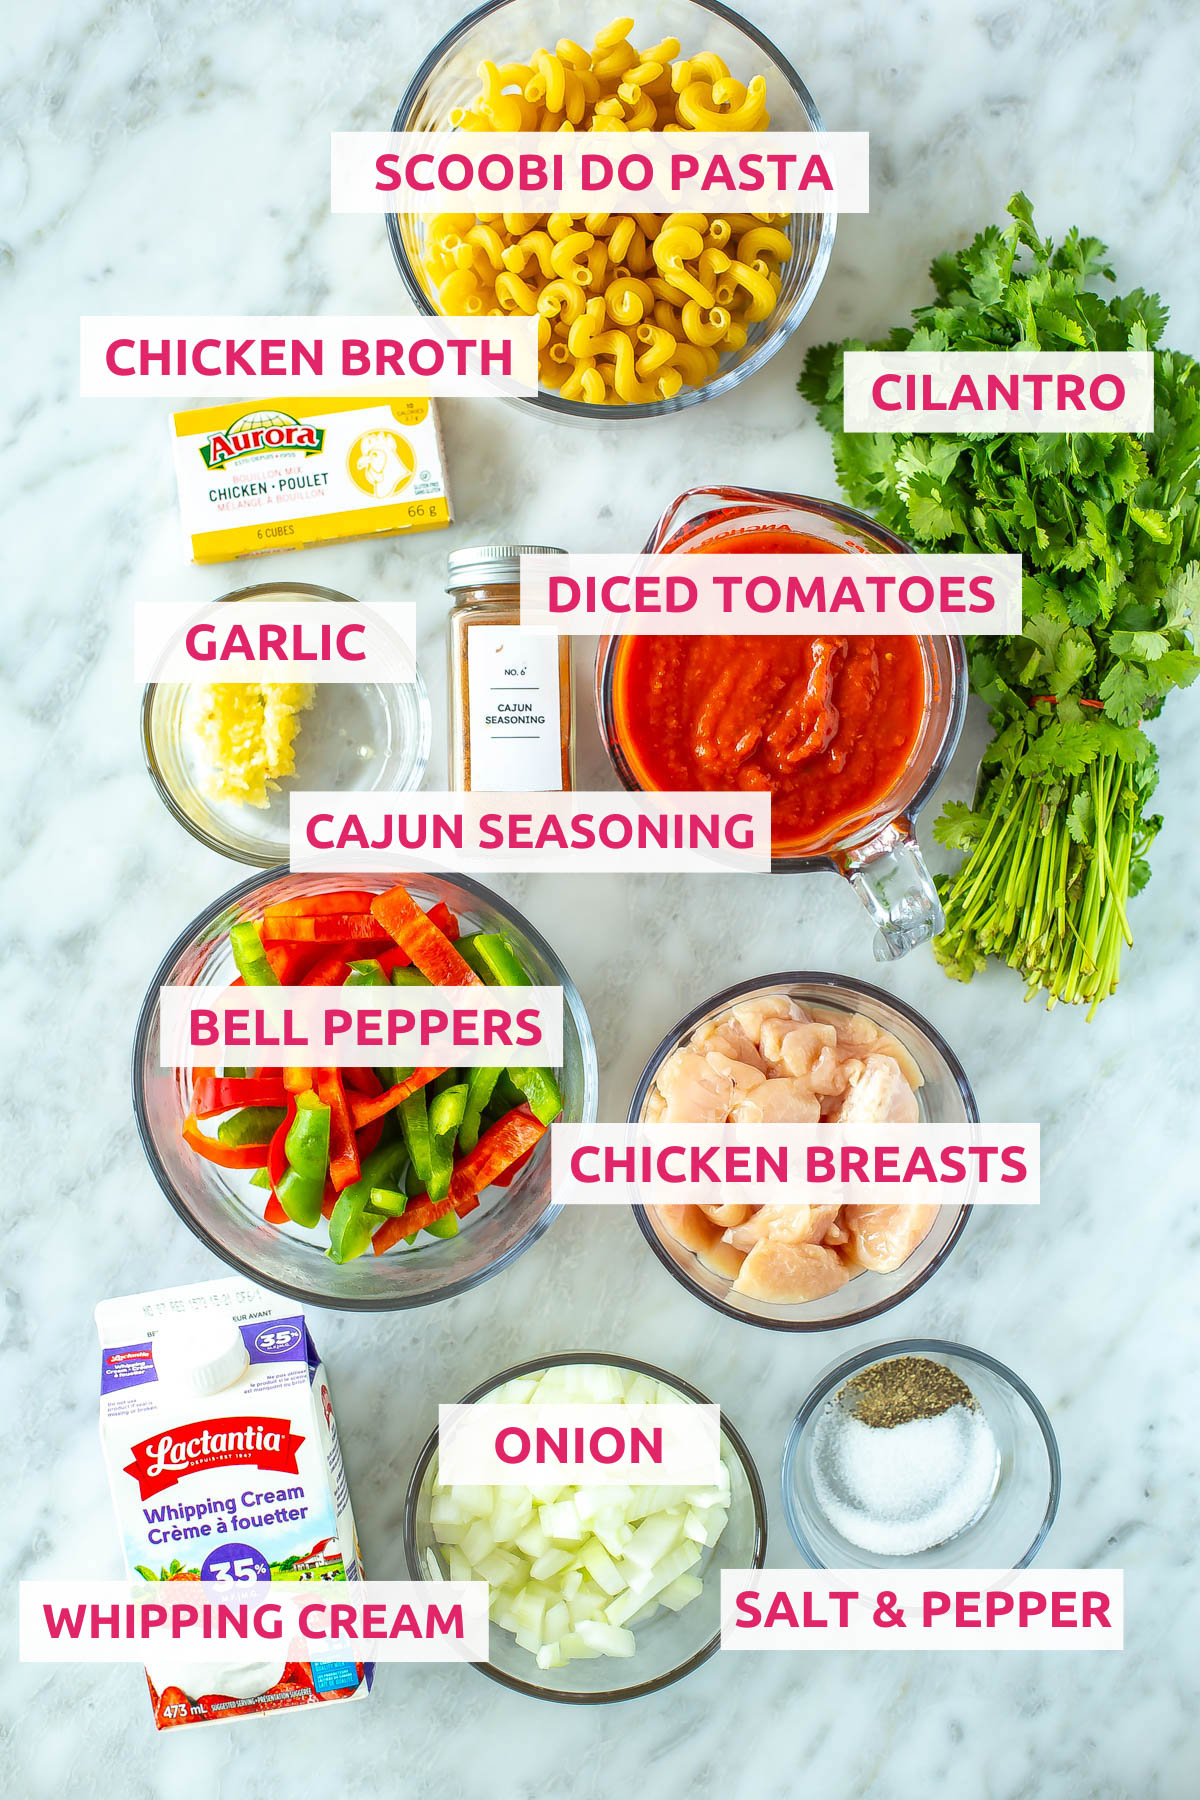 Ingredients for cajun chicken pasta: pasta, chicken breasts, bell peppers, diced tomatoes, chicken broth, garlic, onion, cajun seasoning, whipping cream and cilantro.